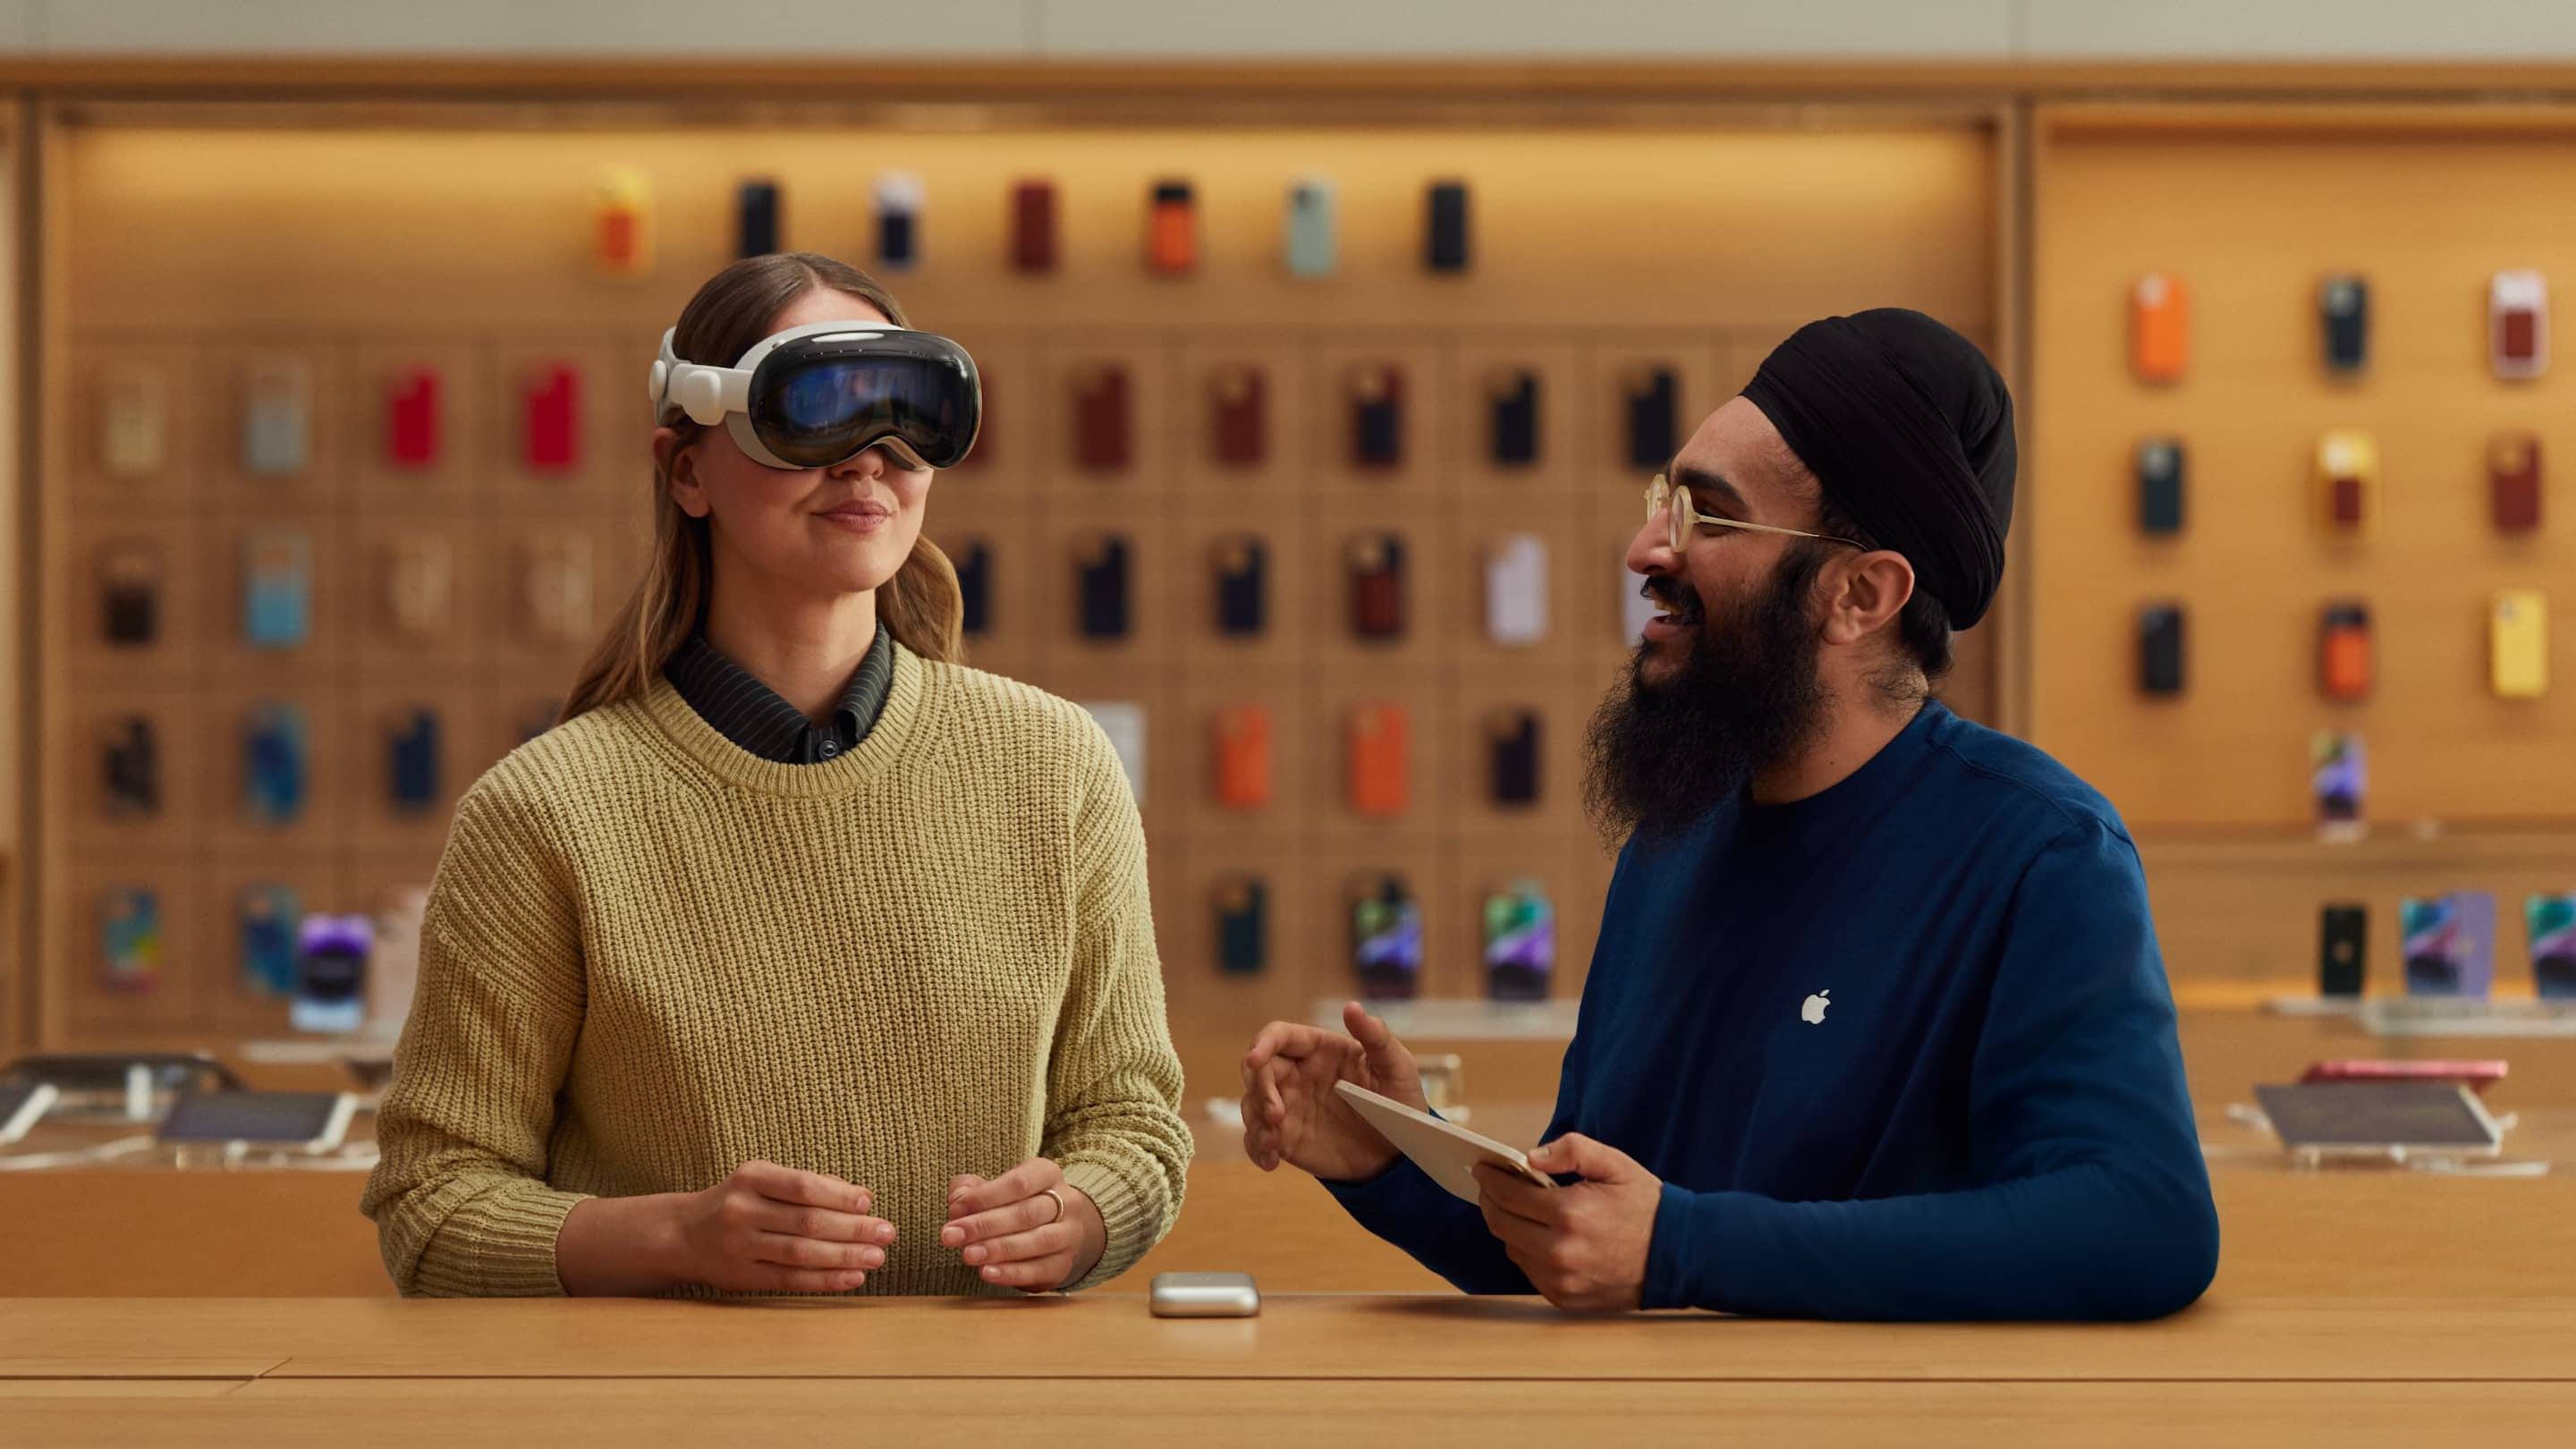 Apple Stores Nationwide to Offer Vision Pro Demo Appointments Starting Tomorrow